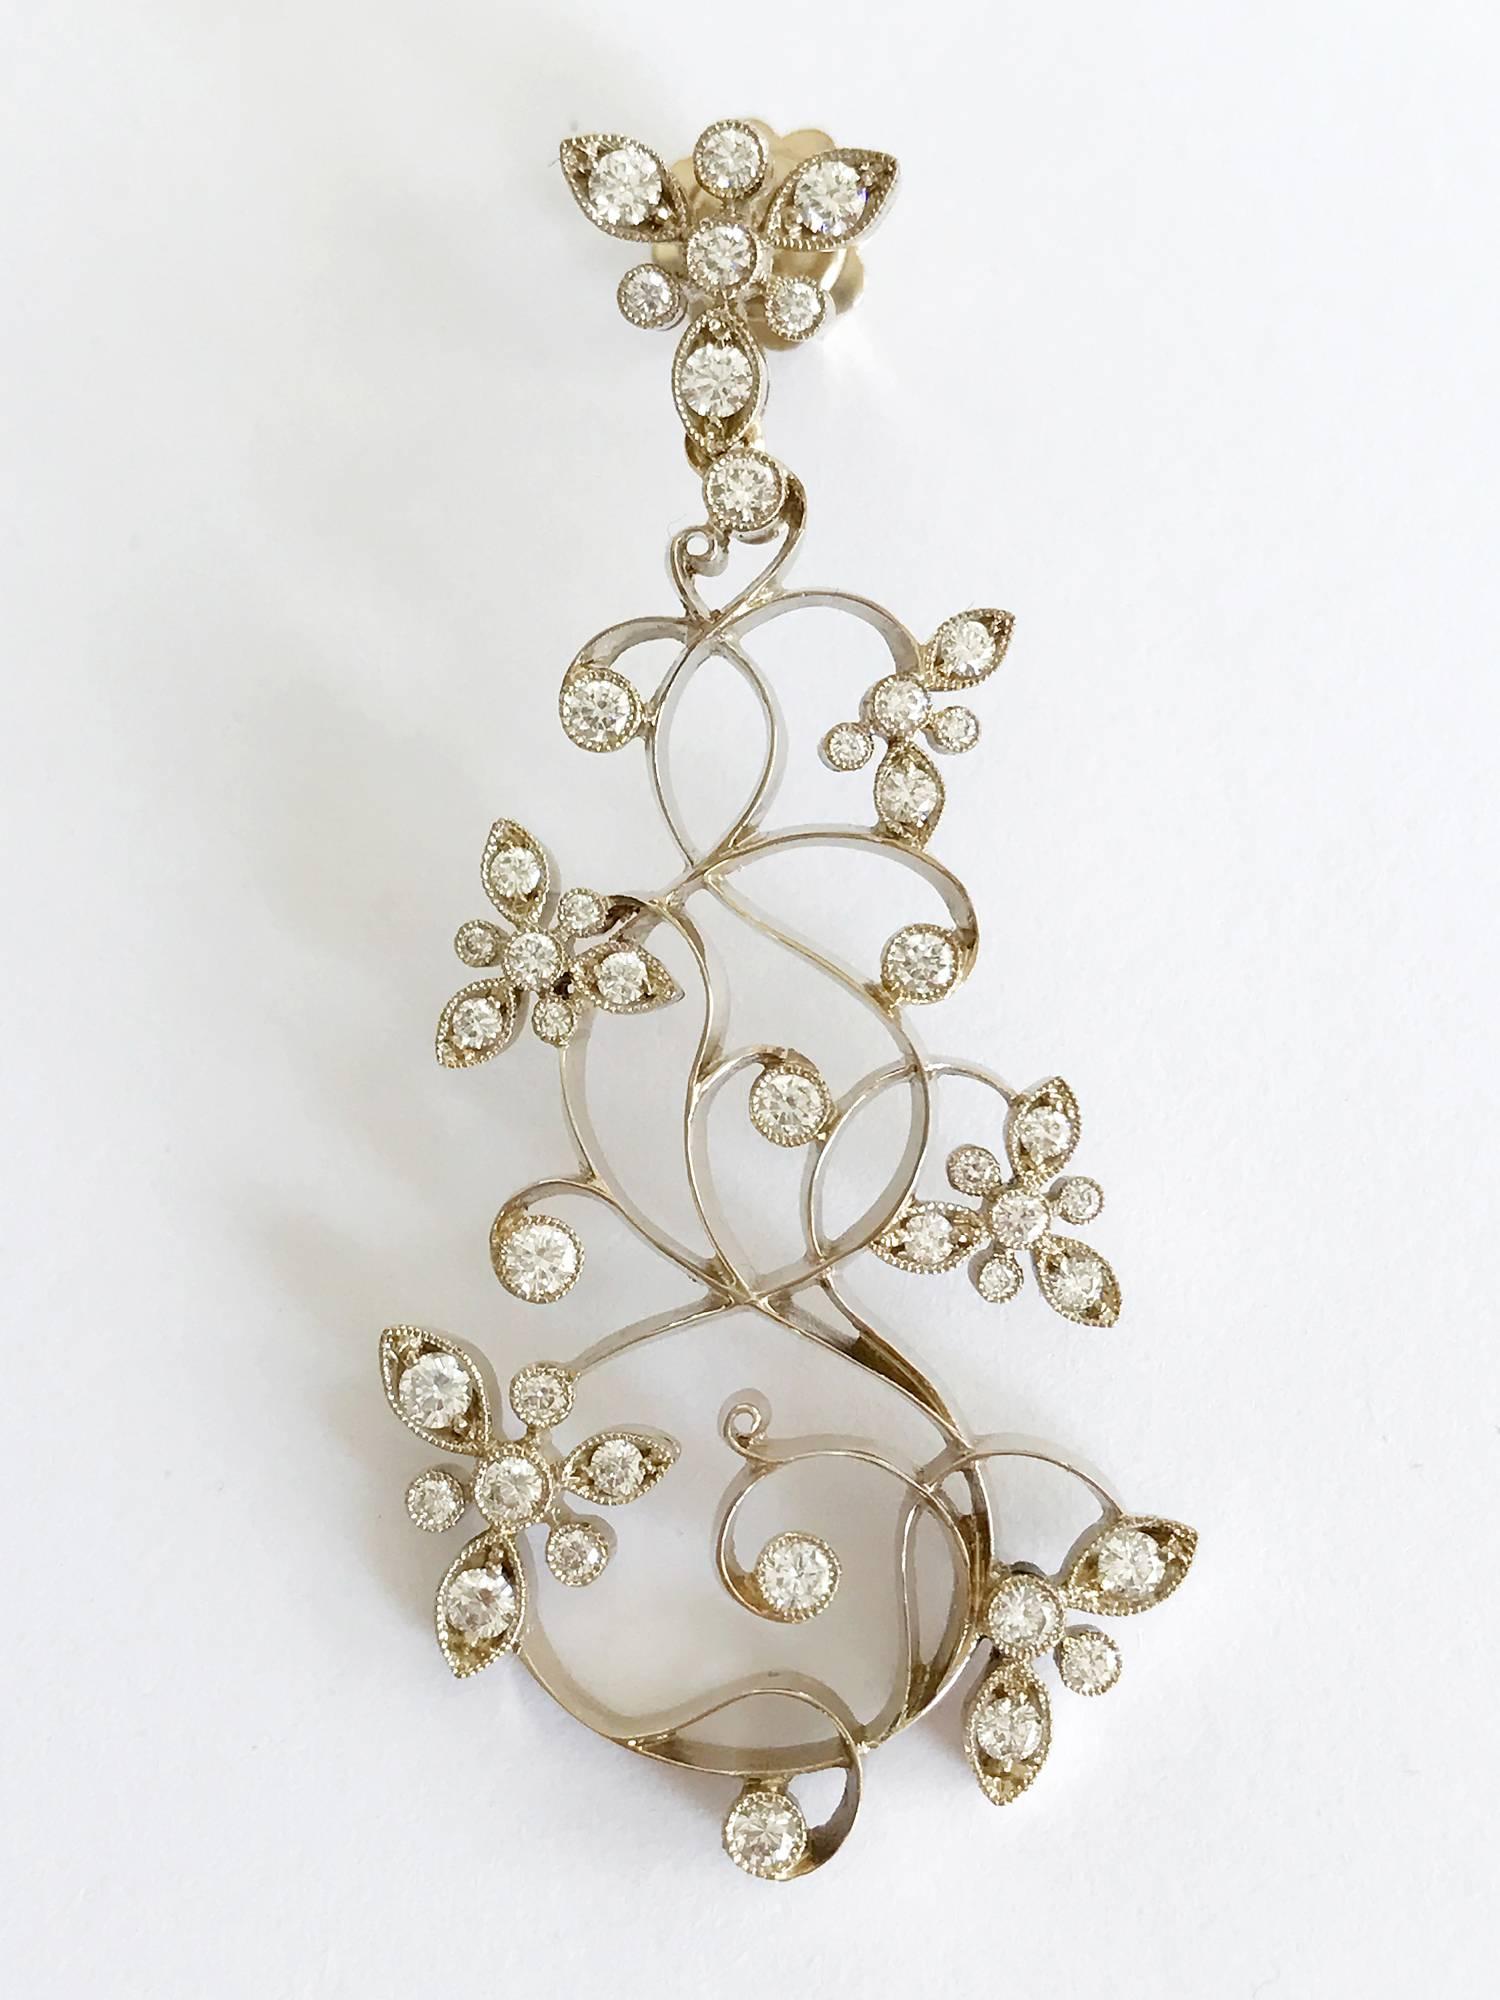 Dalben Diamond White Gold Floral Chandelier Earrings In New Condition For Sale In Como, IT